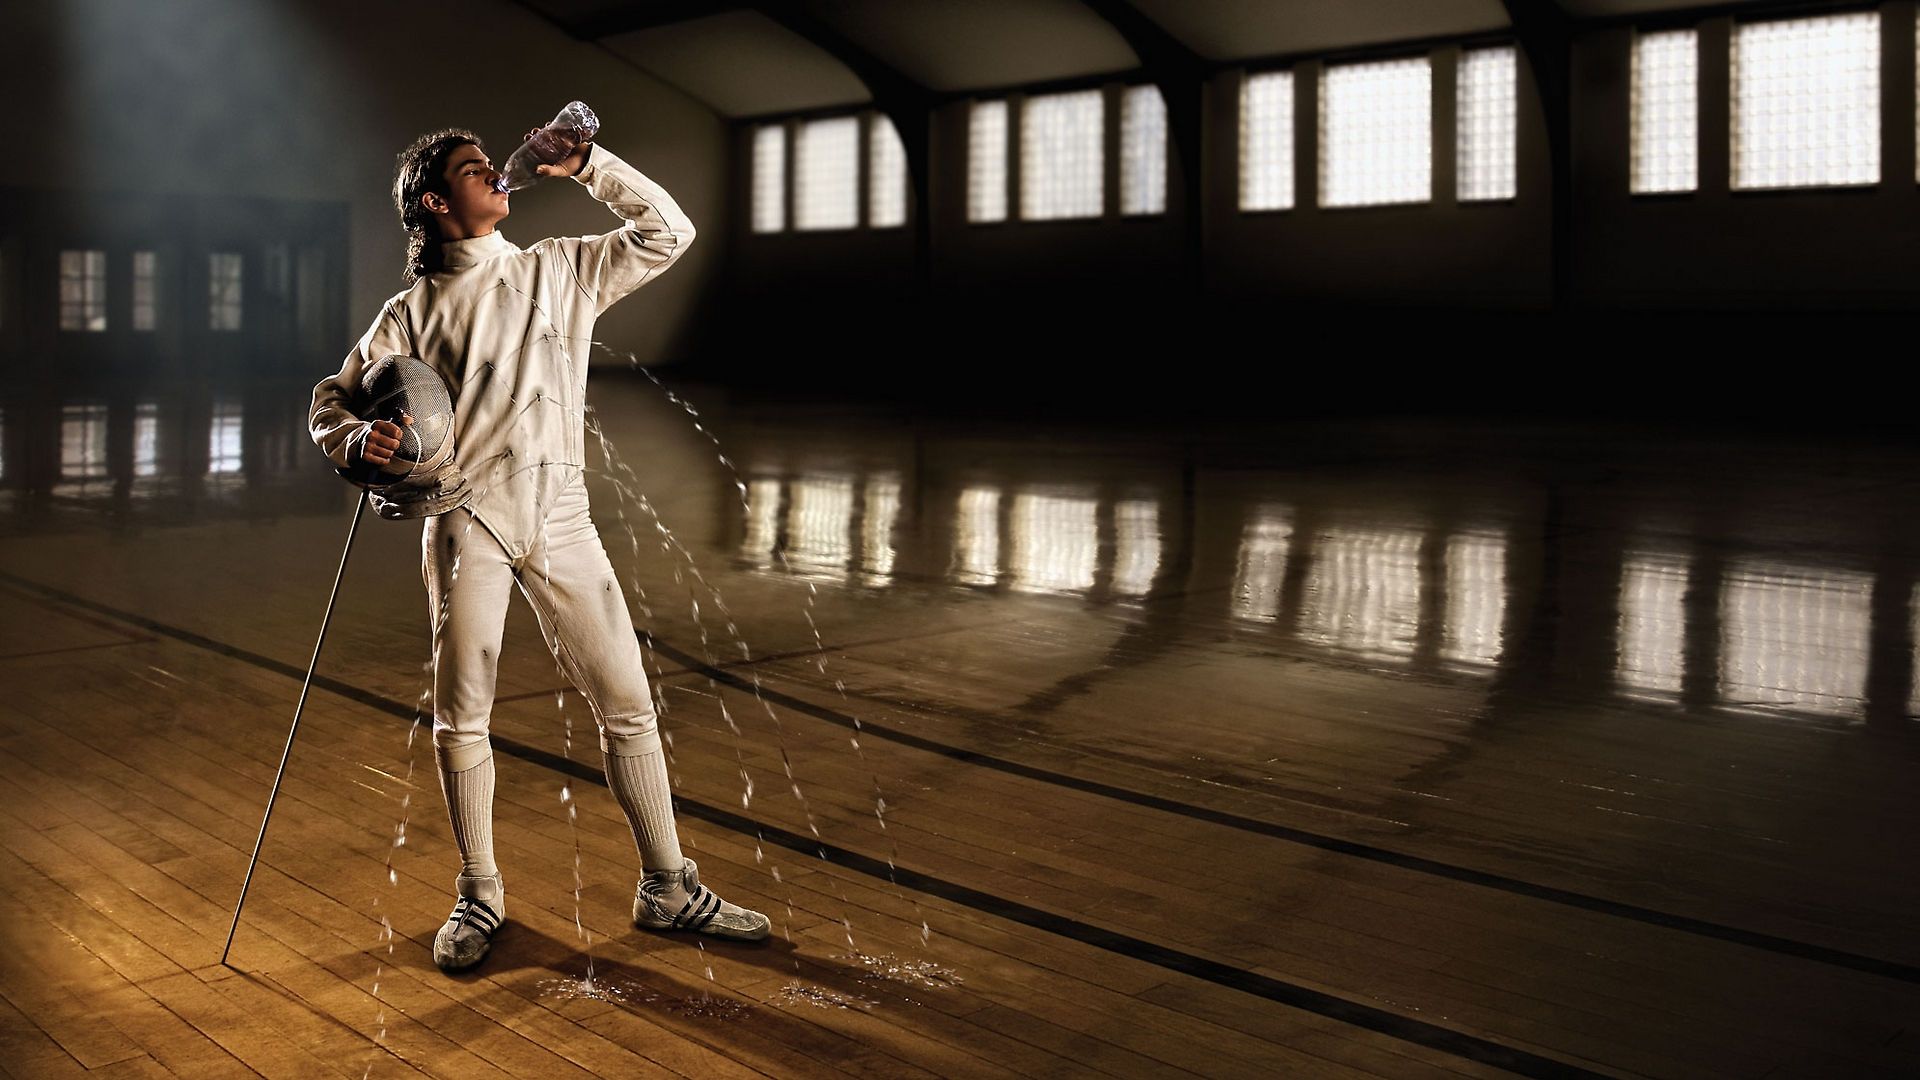 Fencing picture free download